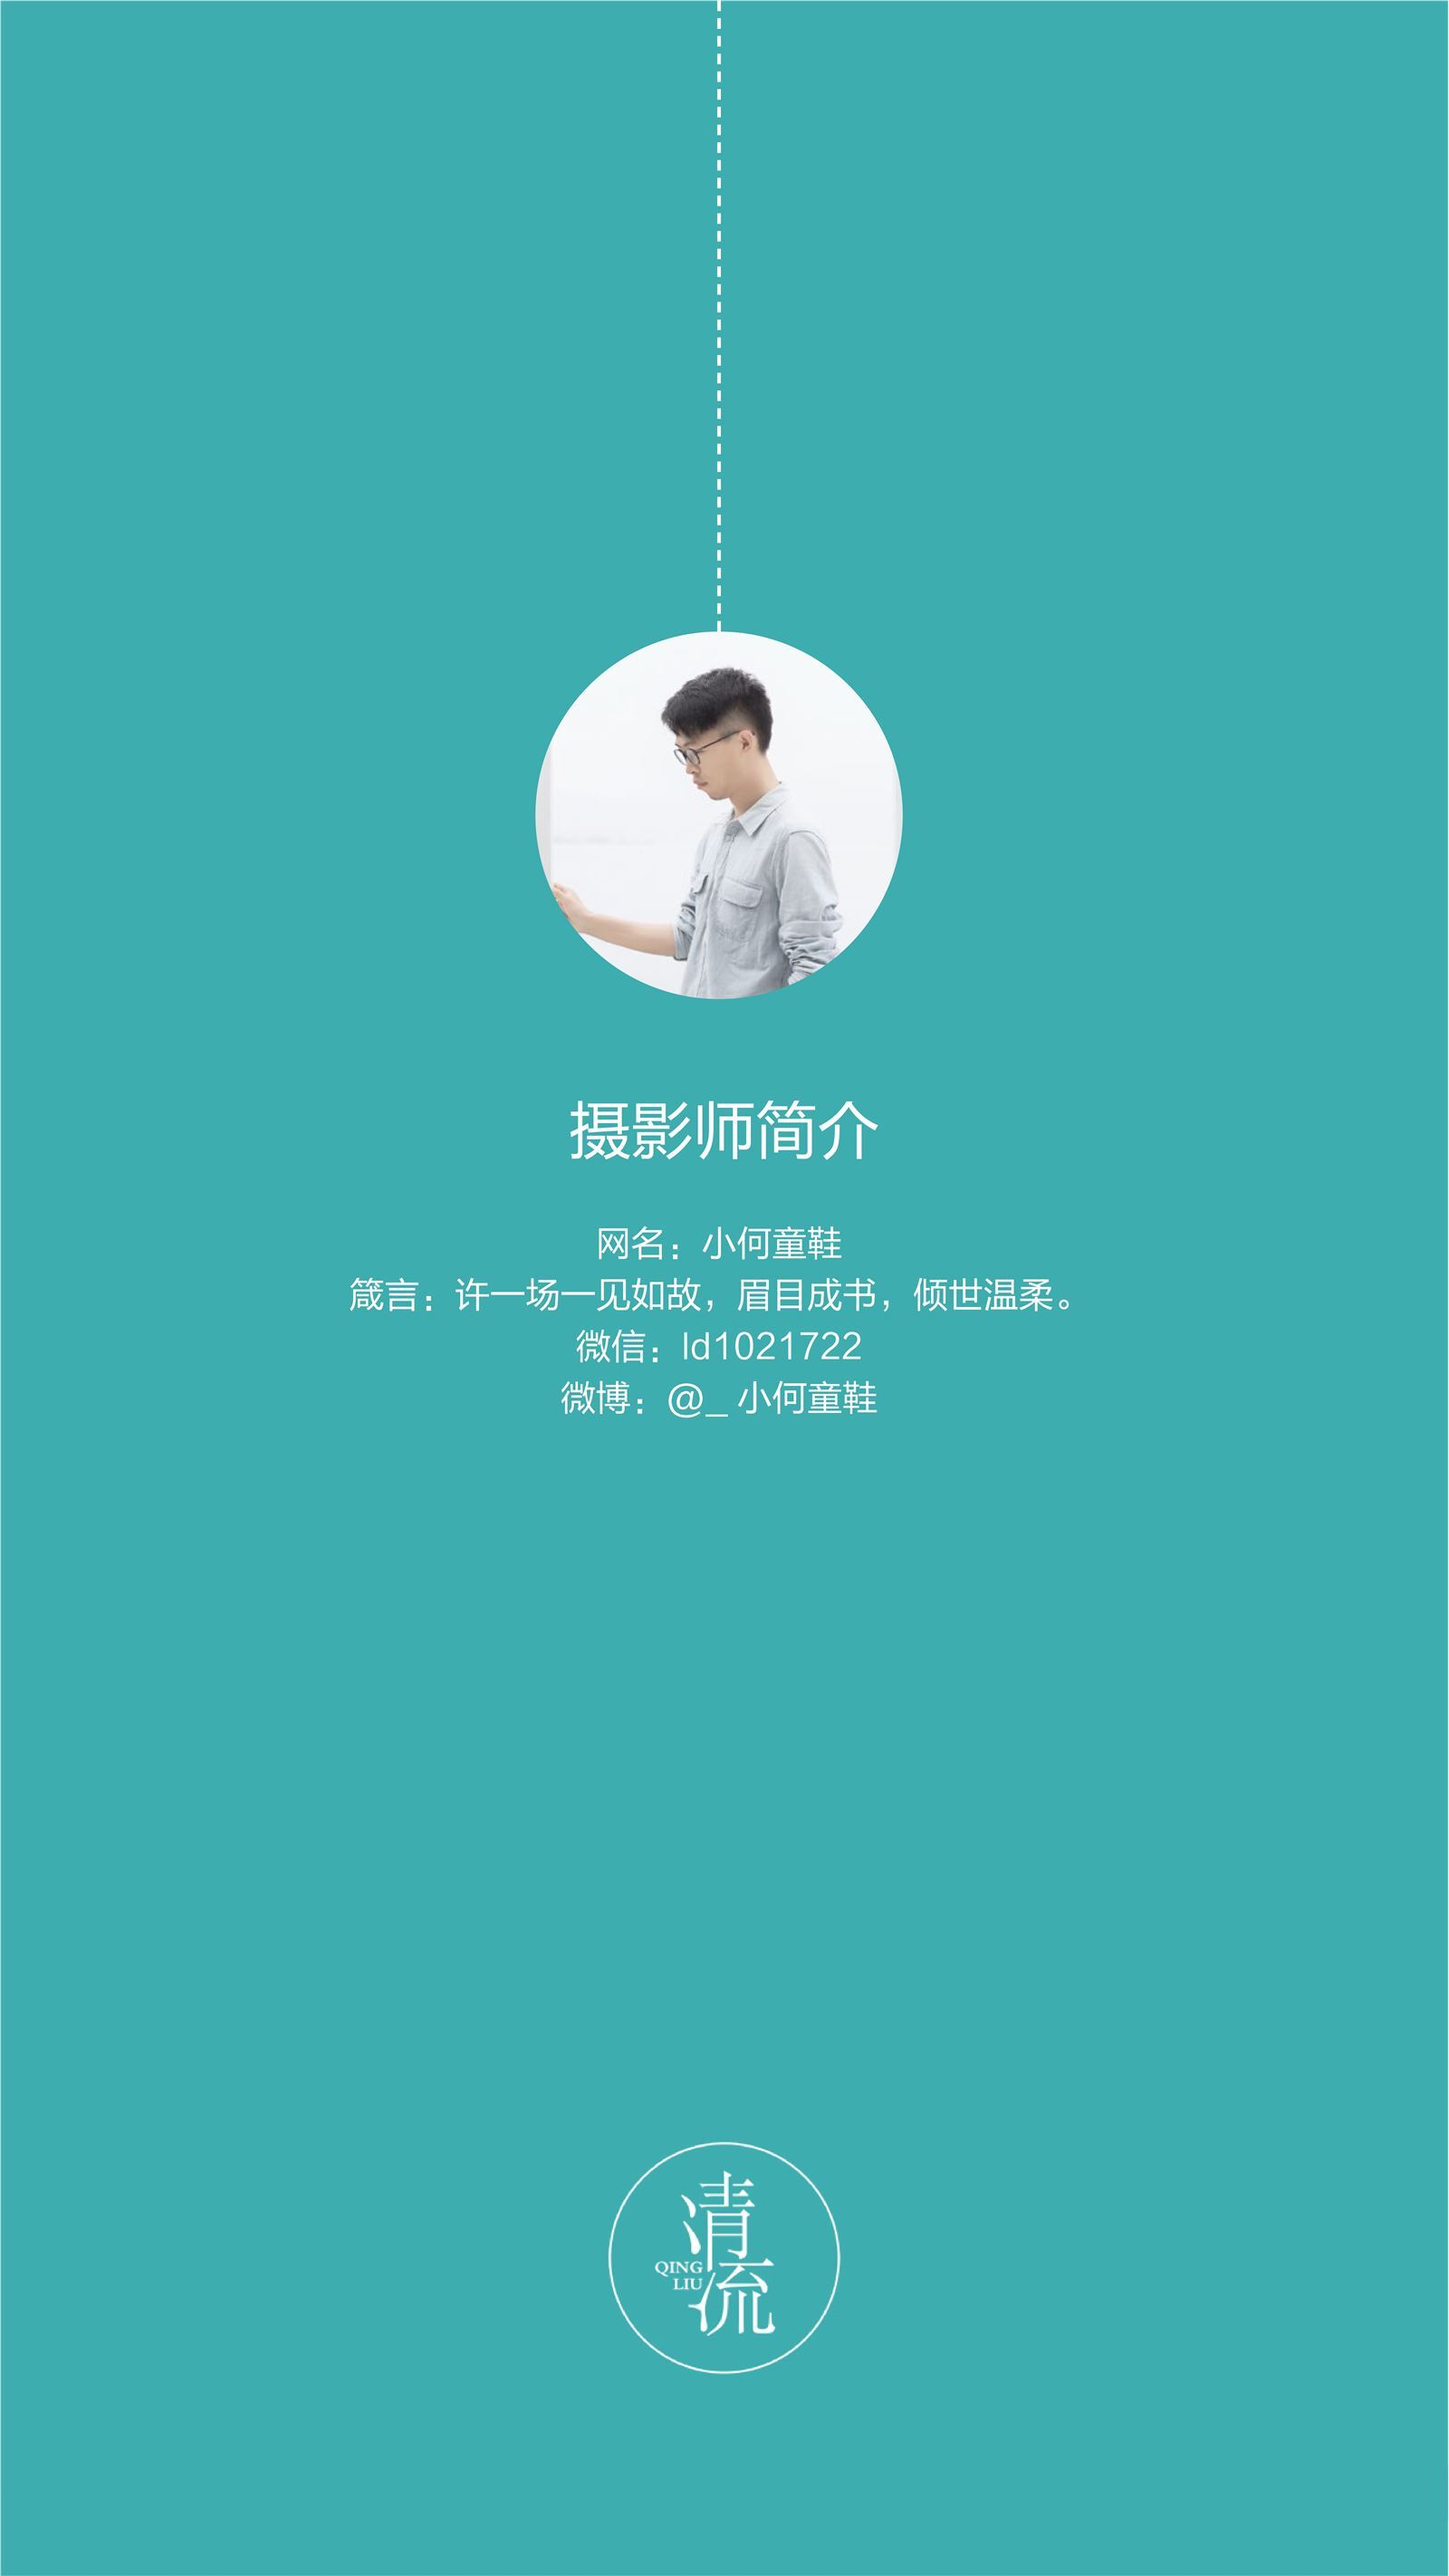 The first issue of Qingliu magazine on August 15, 2017